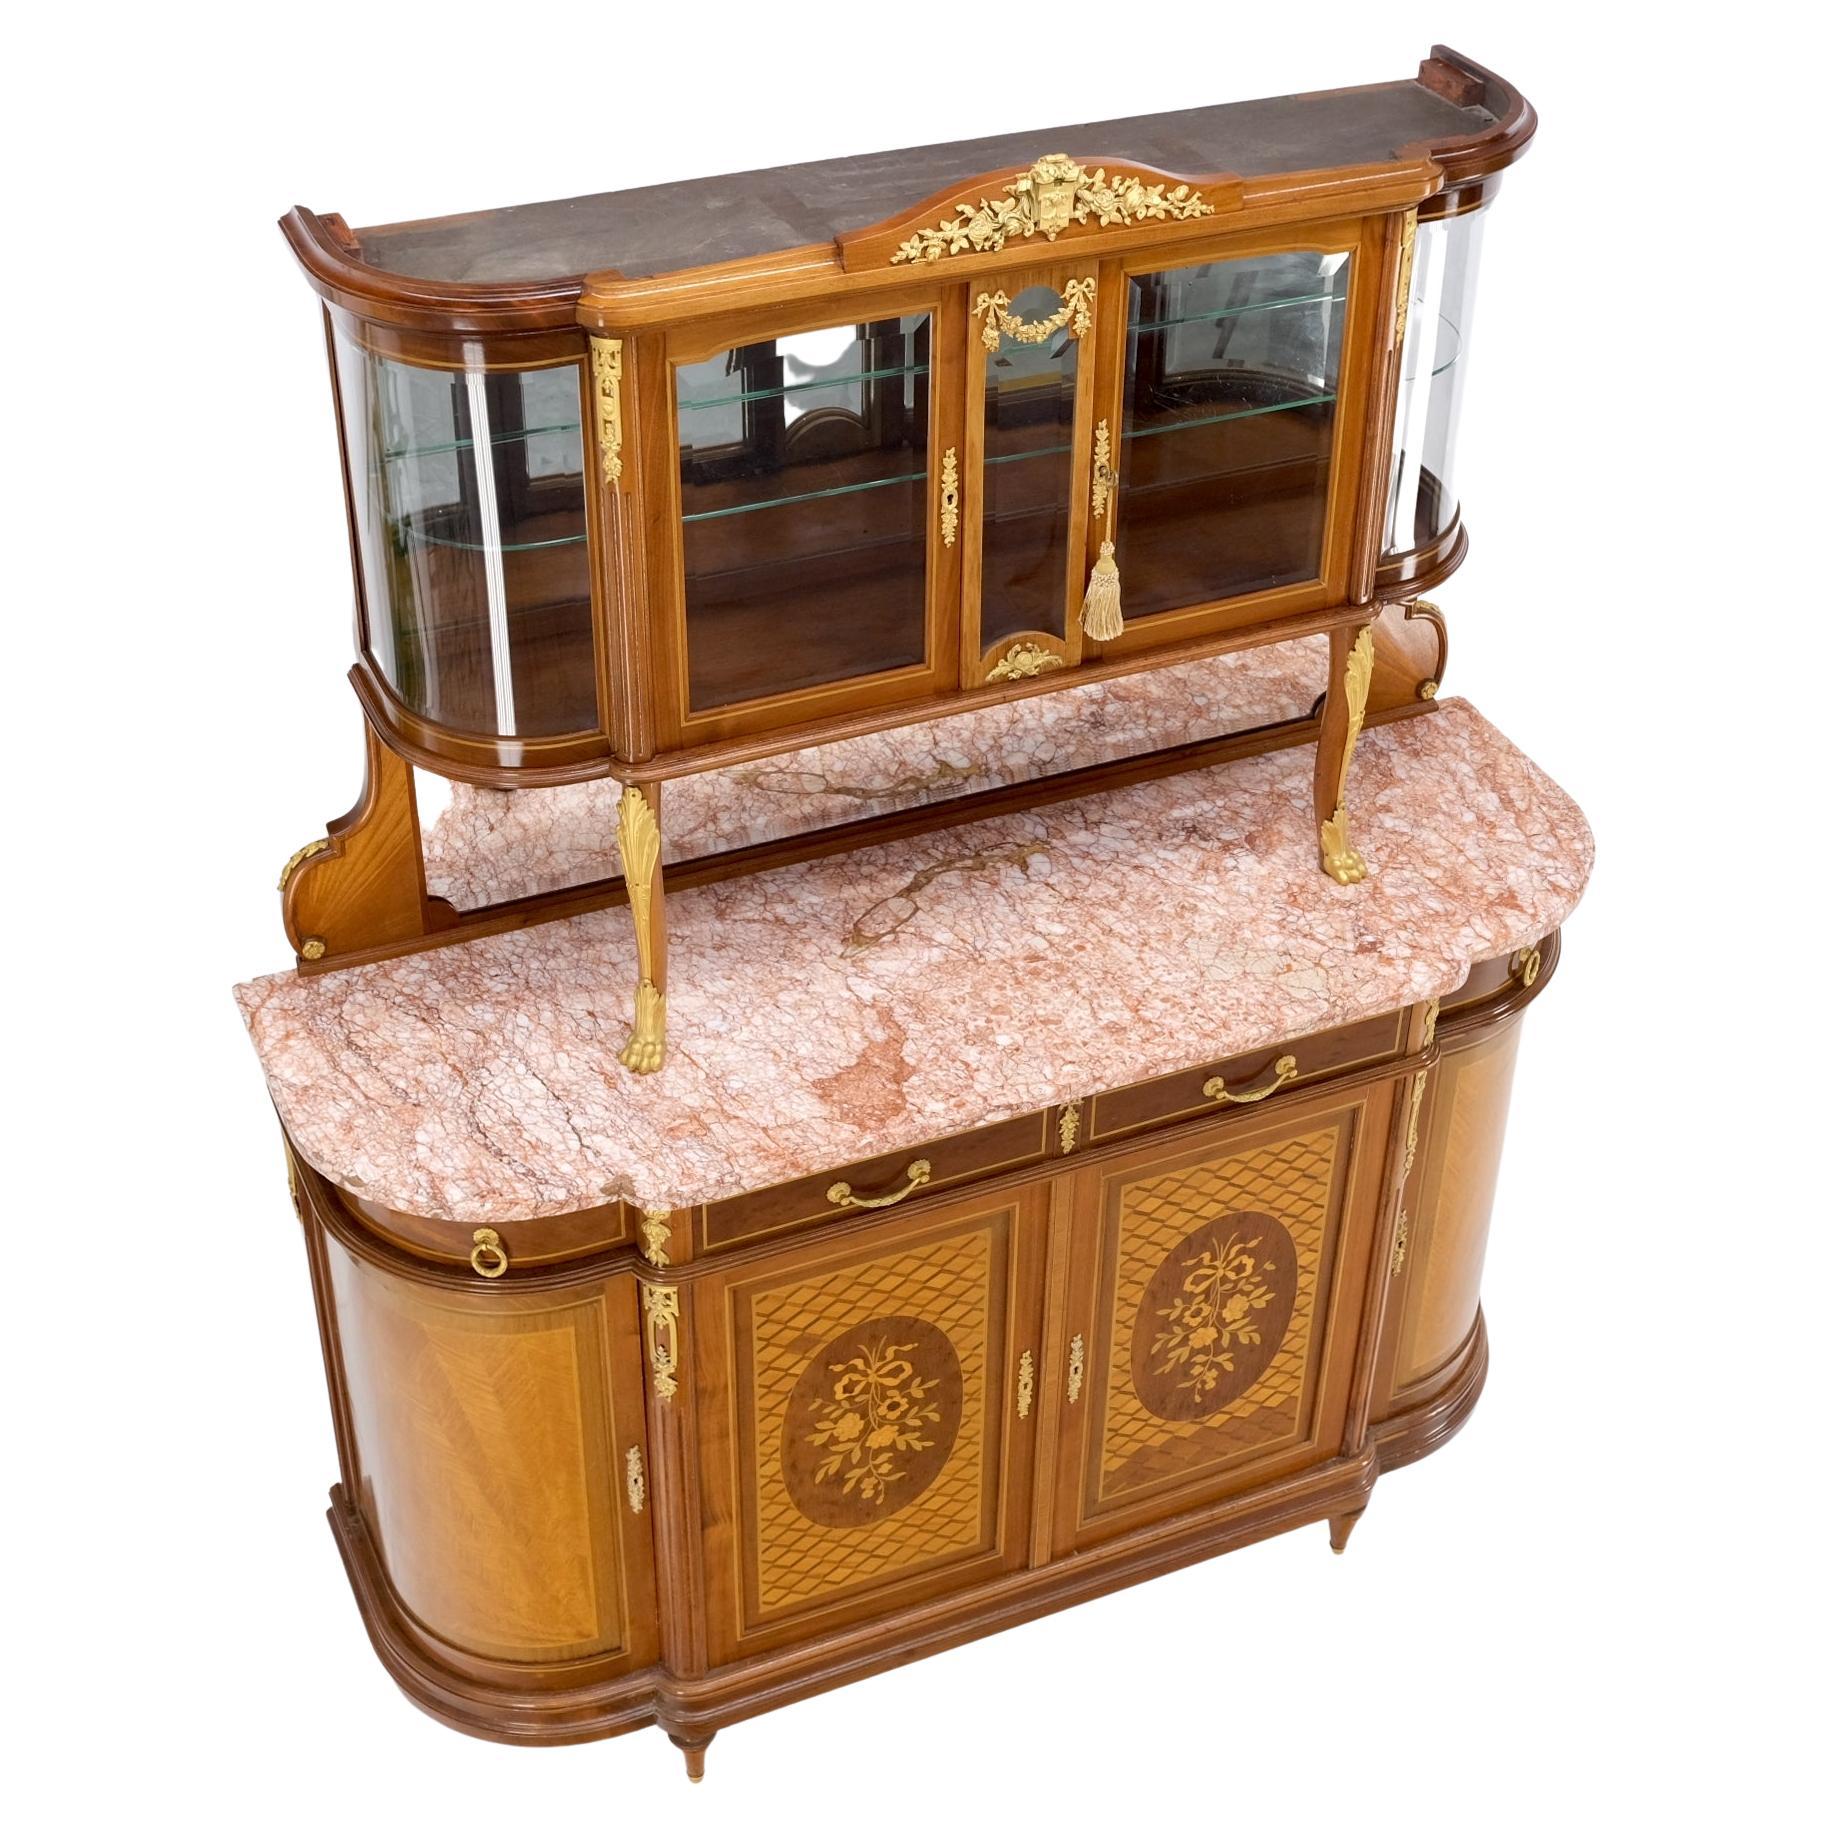 Louis XVI Style Commode Bronze Ormolu-Mounted Vitrine Buffet Sideboard. Marble top two part French cabinet
Curved beveled glass vitrine. Outstanding inlay work. C.1920s piece in mint condition.